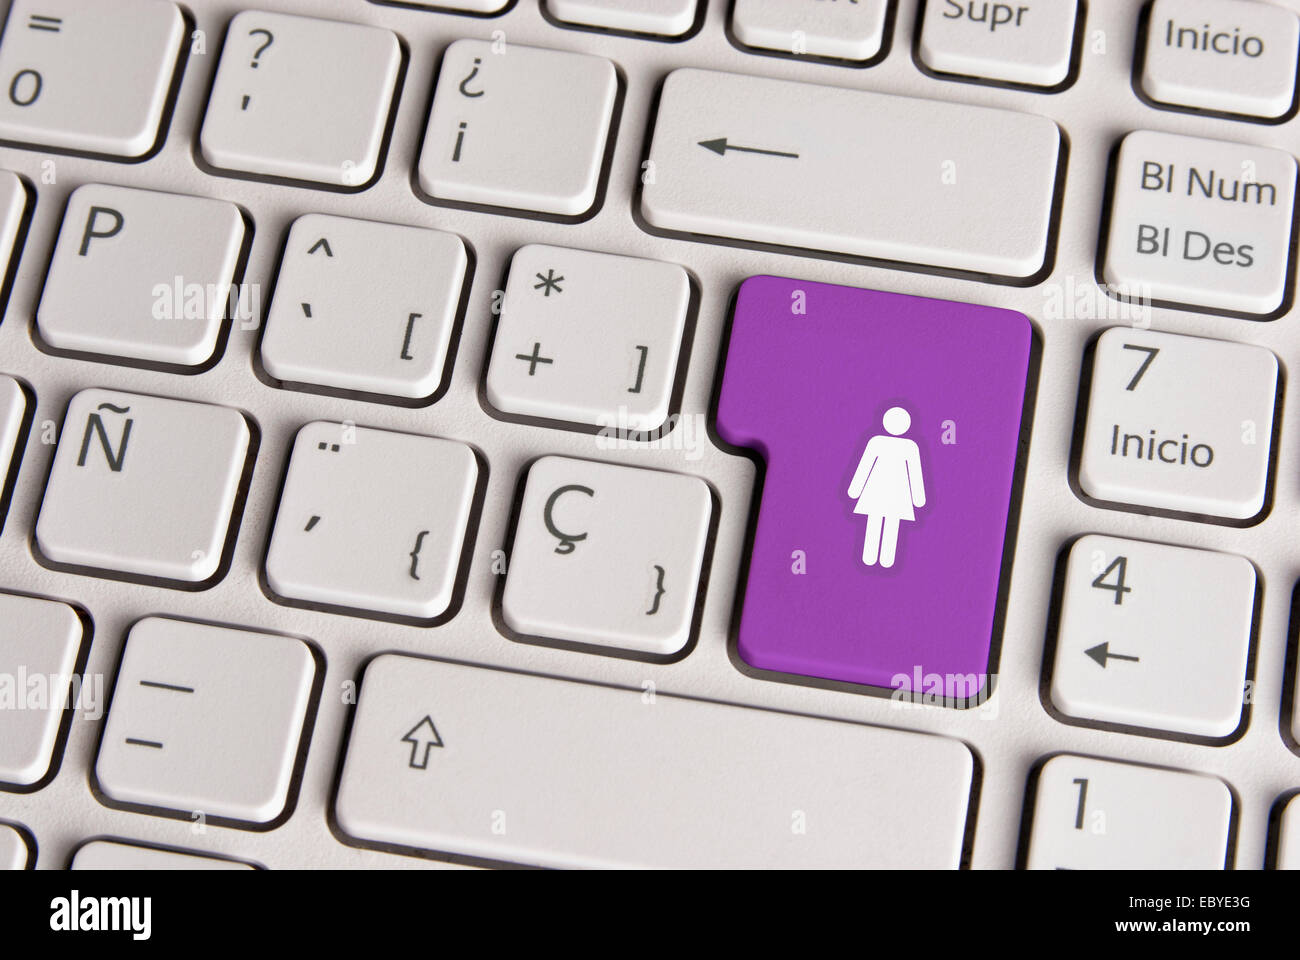 Spanish keyboard with female gender women figure icon over purple background button. Image with clipping path for easy change th Stock Photo